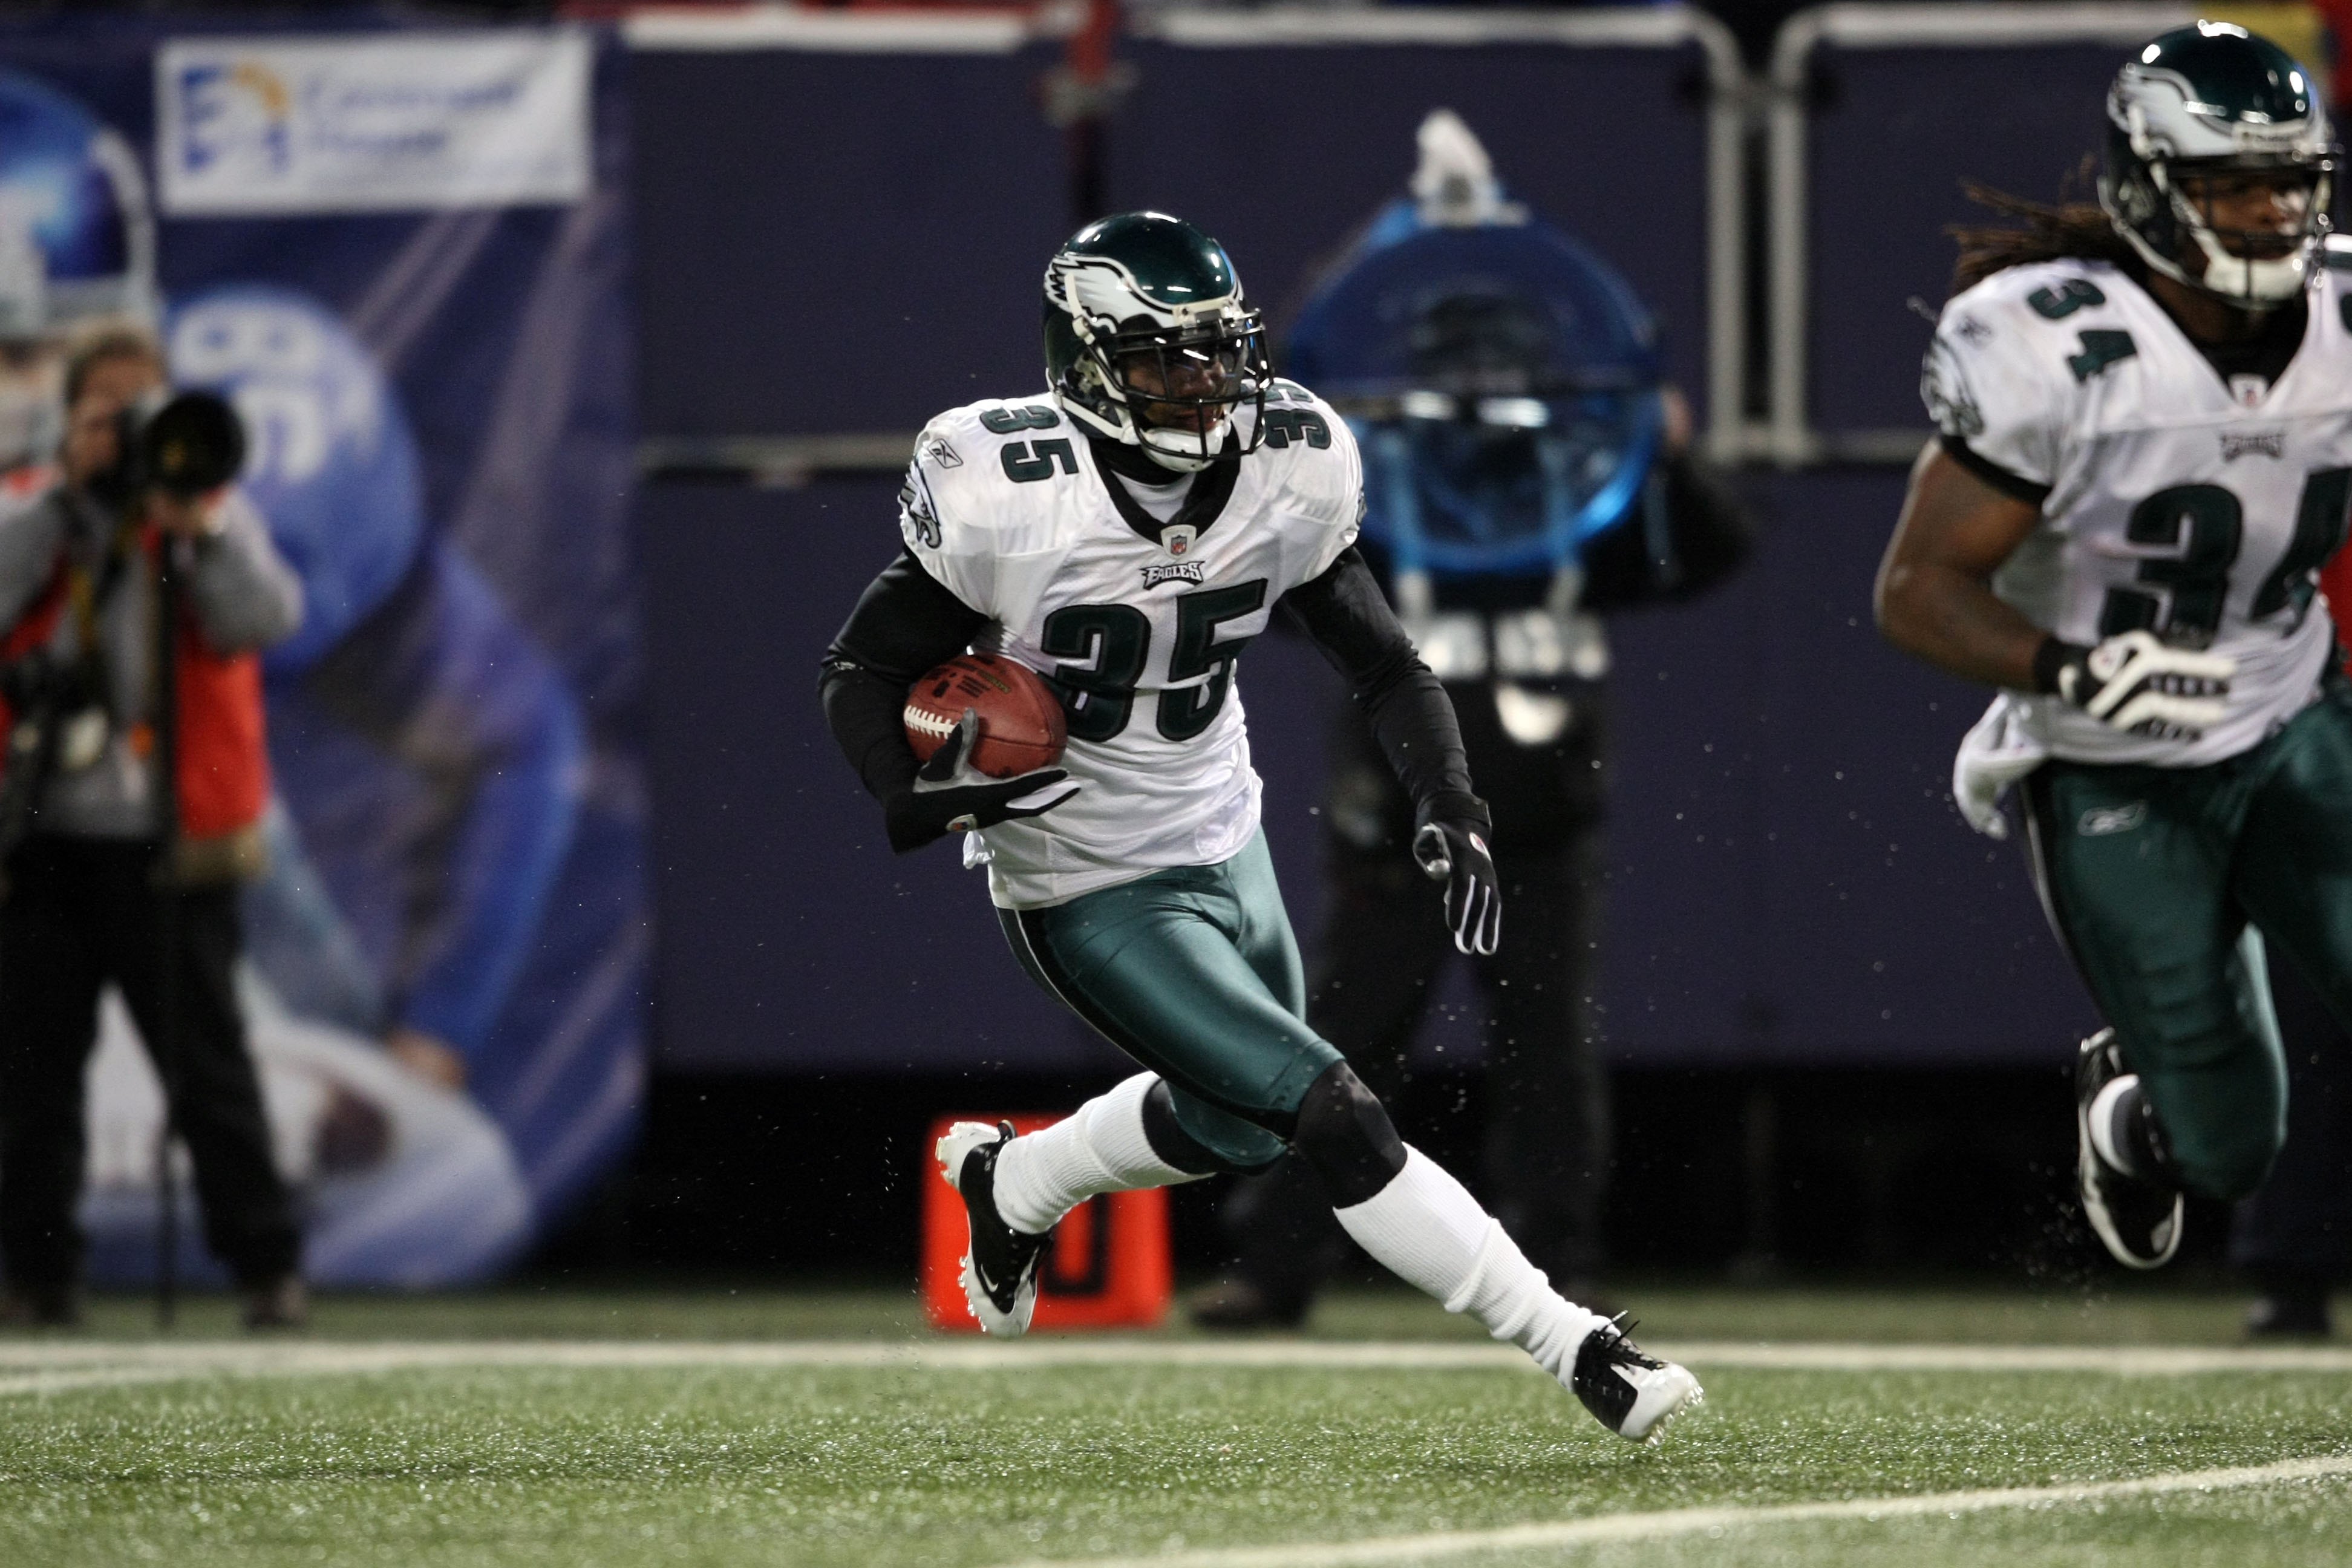 EAST RUTHERFORD, NJ - DECEMBER 13:  Macho Harris #35 of the Philadelphia Eagles runs the ball against the New York Giants at Giants Stadium on December 13, 2009 in East Rutherford, New Jersey.  (Photo by Nick Laham/Getty Images)